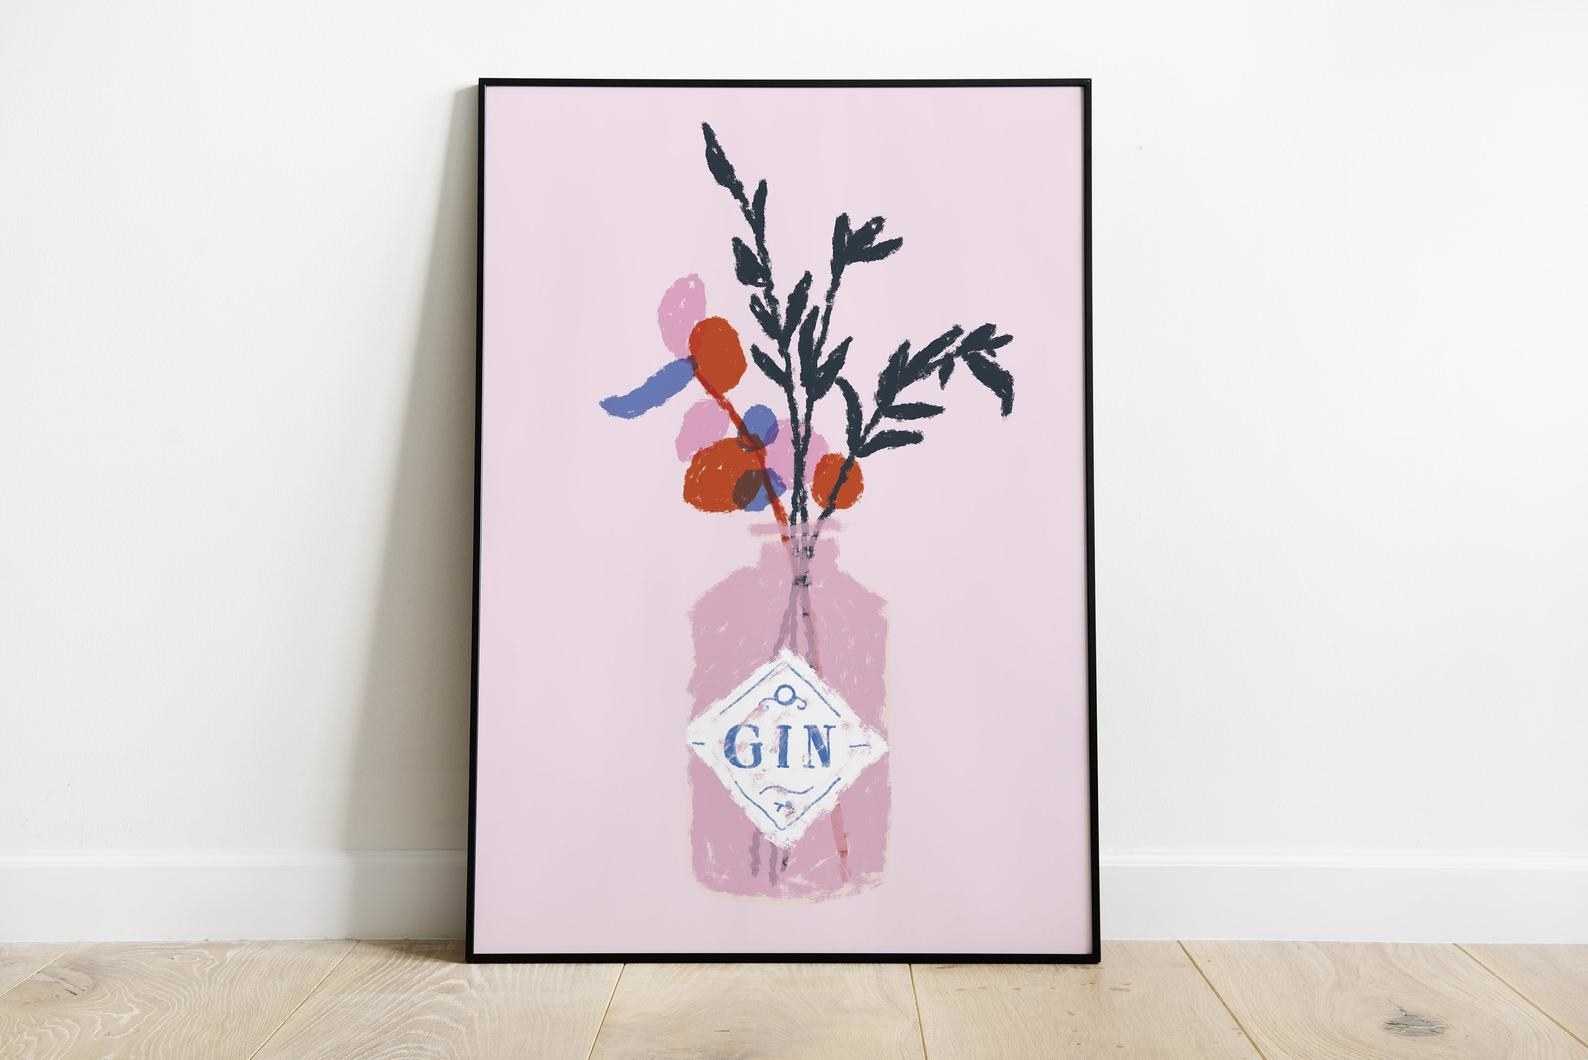 A pink, red, and blue print of a gin bottle being used as a vase with flowers